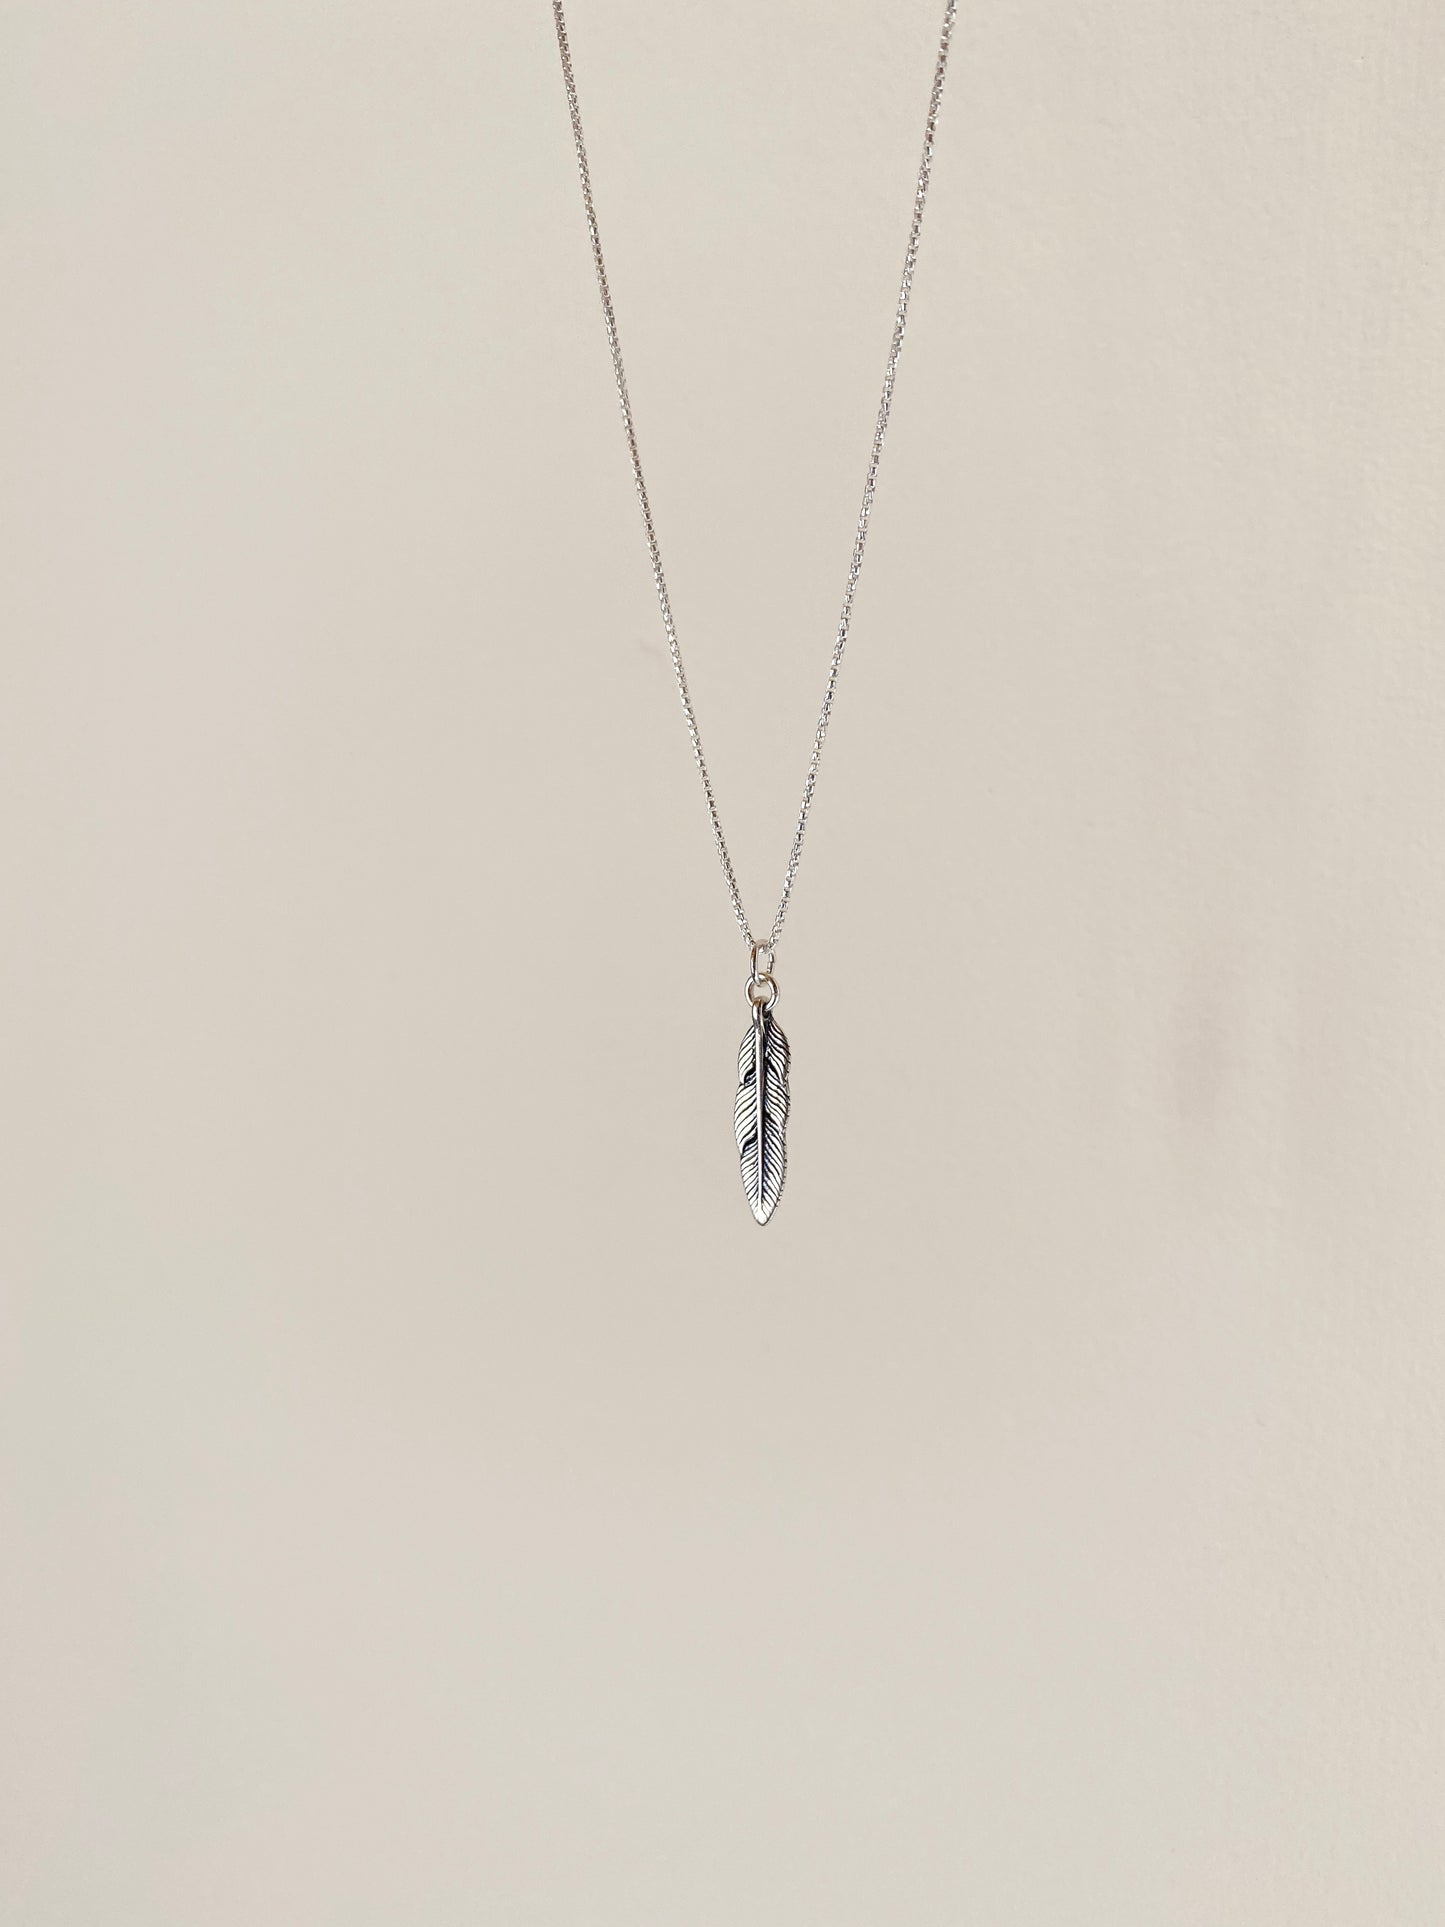 Silver Feather ~ Sterling Silver Charm Necklace - Sacred Symbols Series